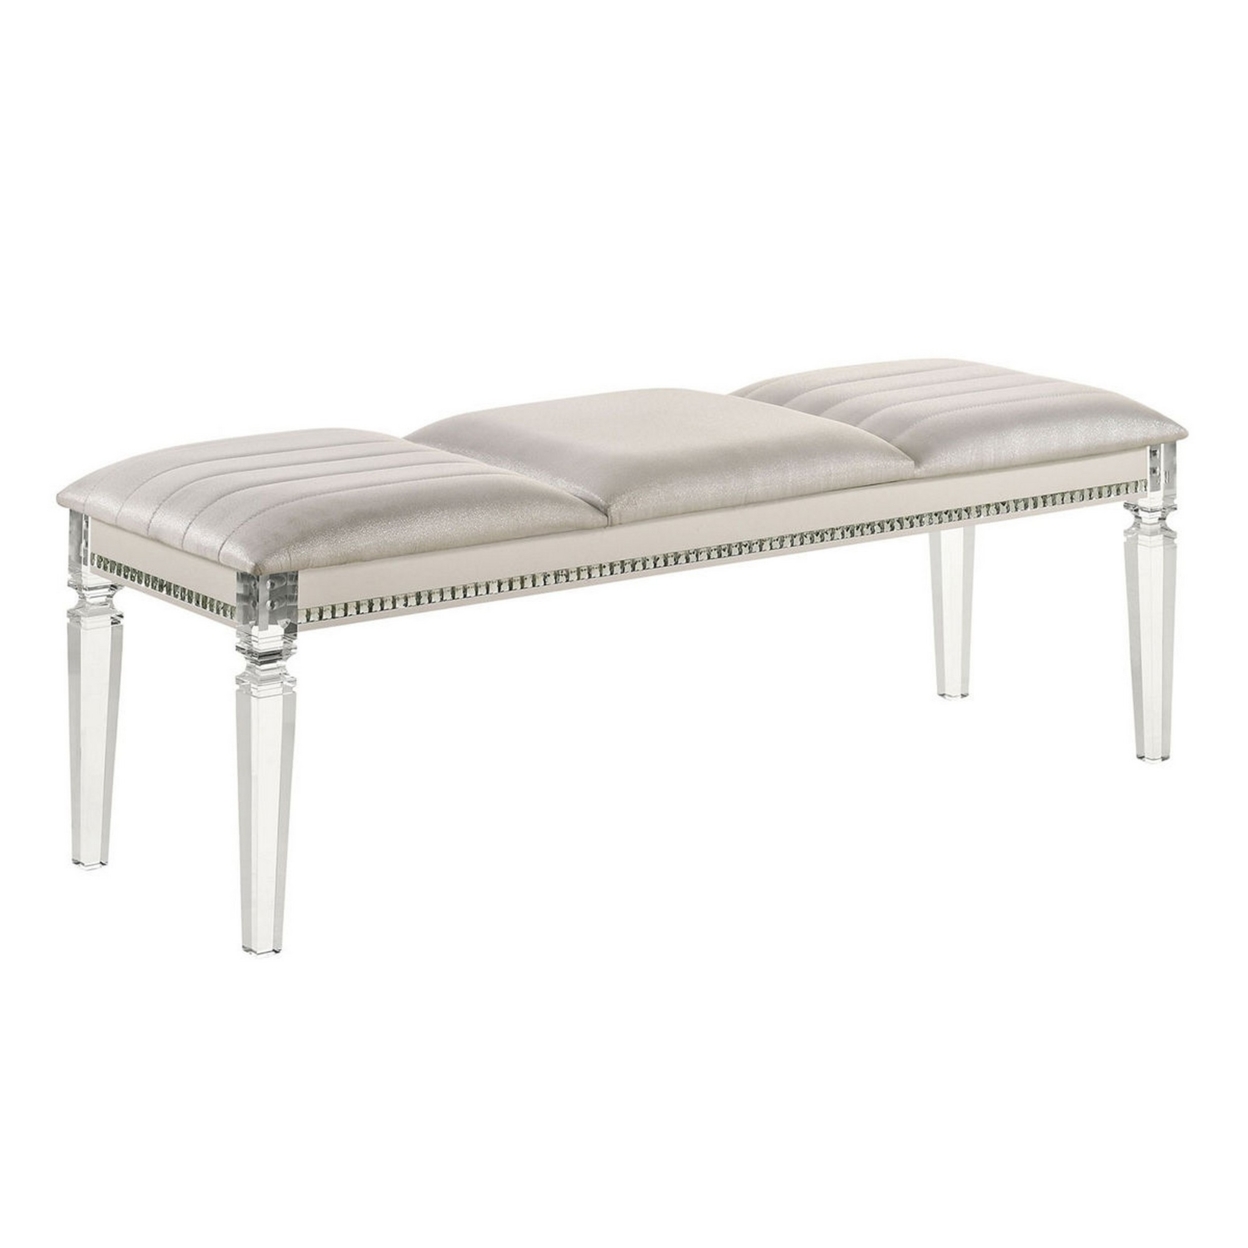 Tufted Leatherette Seater Wooden Bench With Mirror Accents, White- Saltoro Sherpi